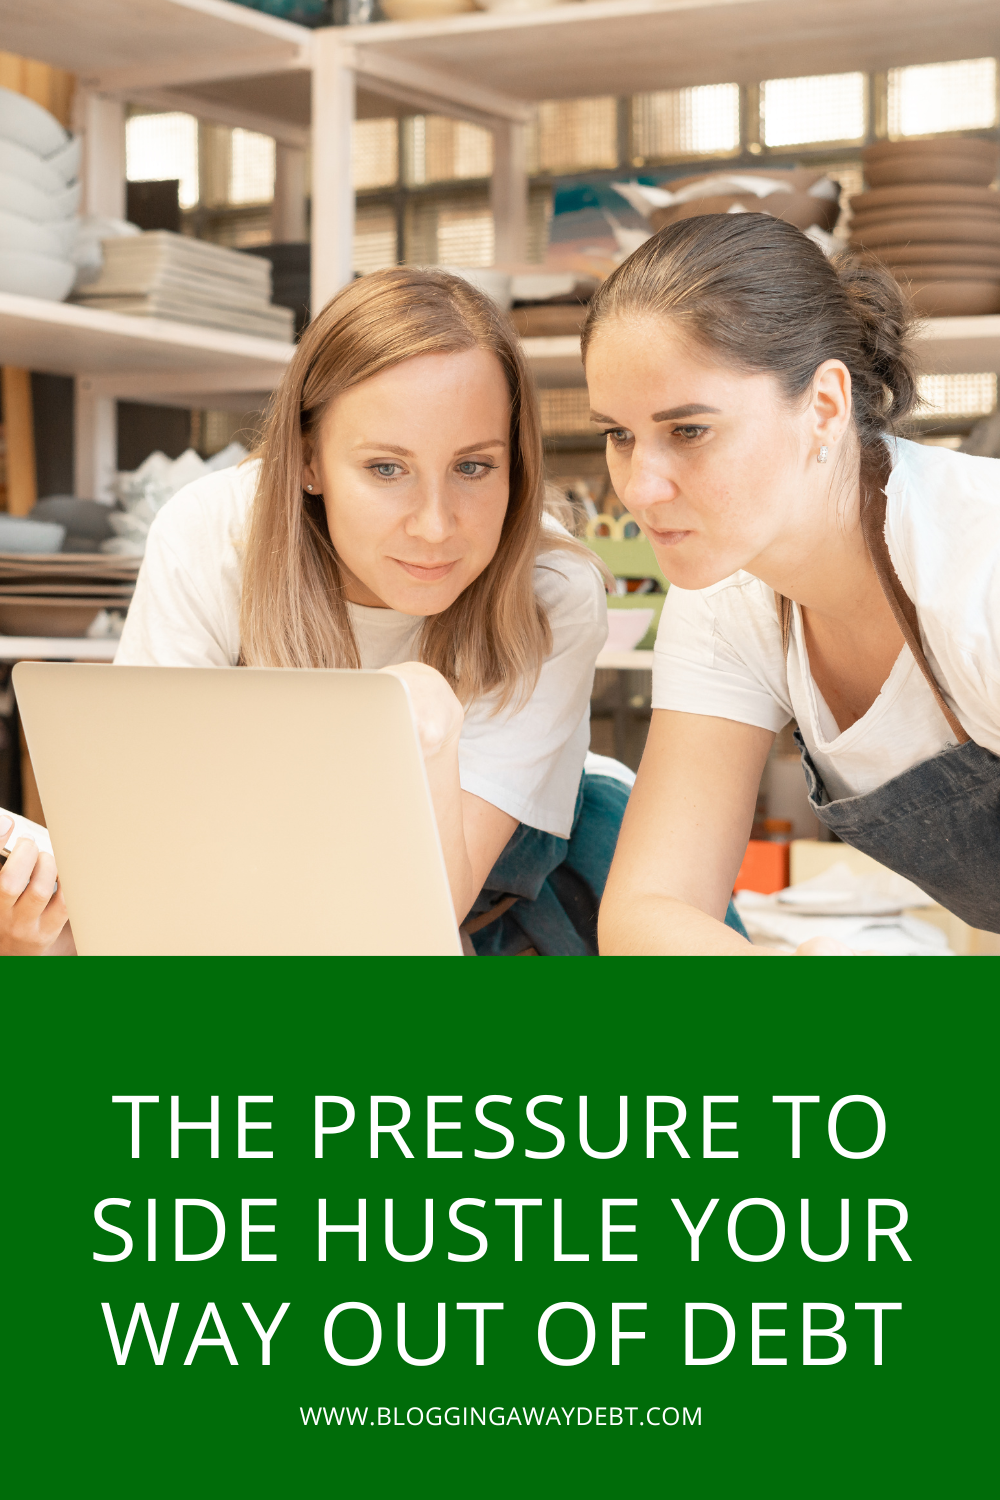 The Pressure to Side Hustle Your Way Out of Debt